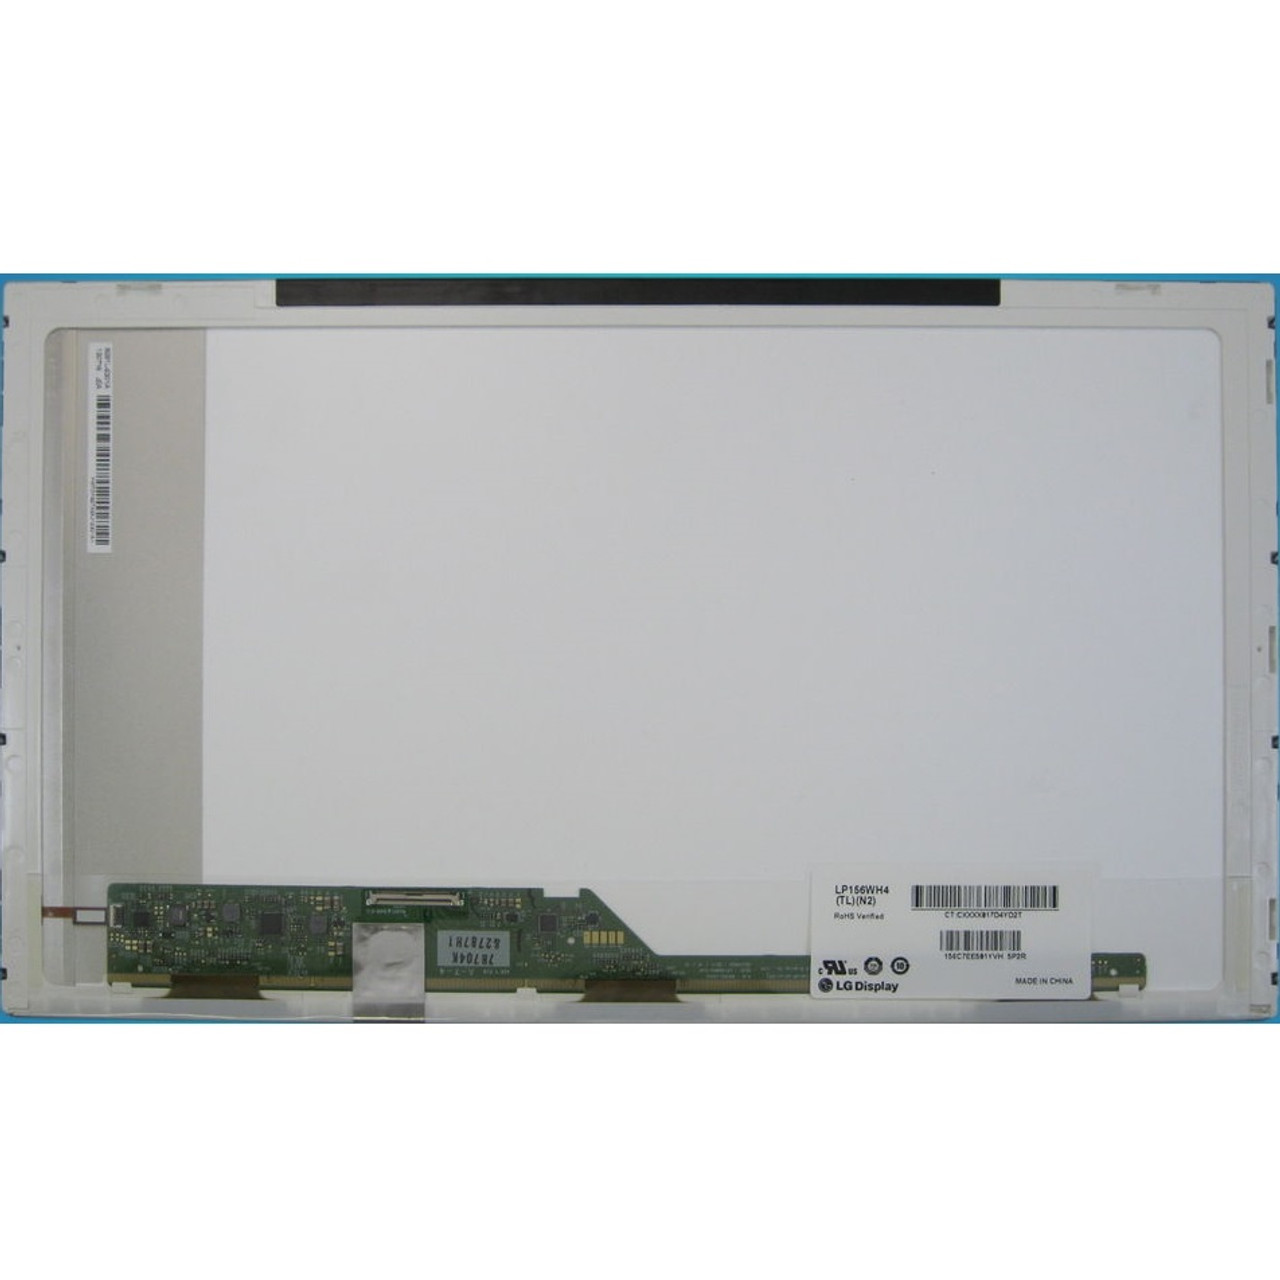 Lg Lp156wh4 Tl N2 156 Led Screen Glossy 1366768 Left 40 Pin Extremepc Online Store 8287